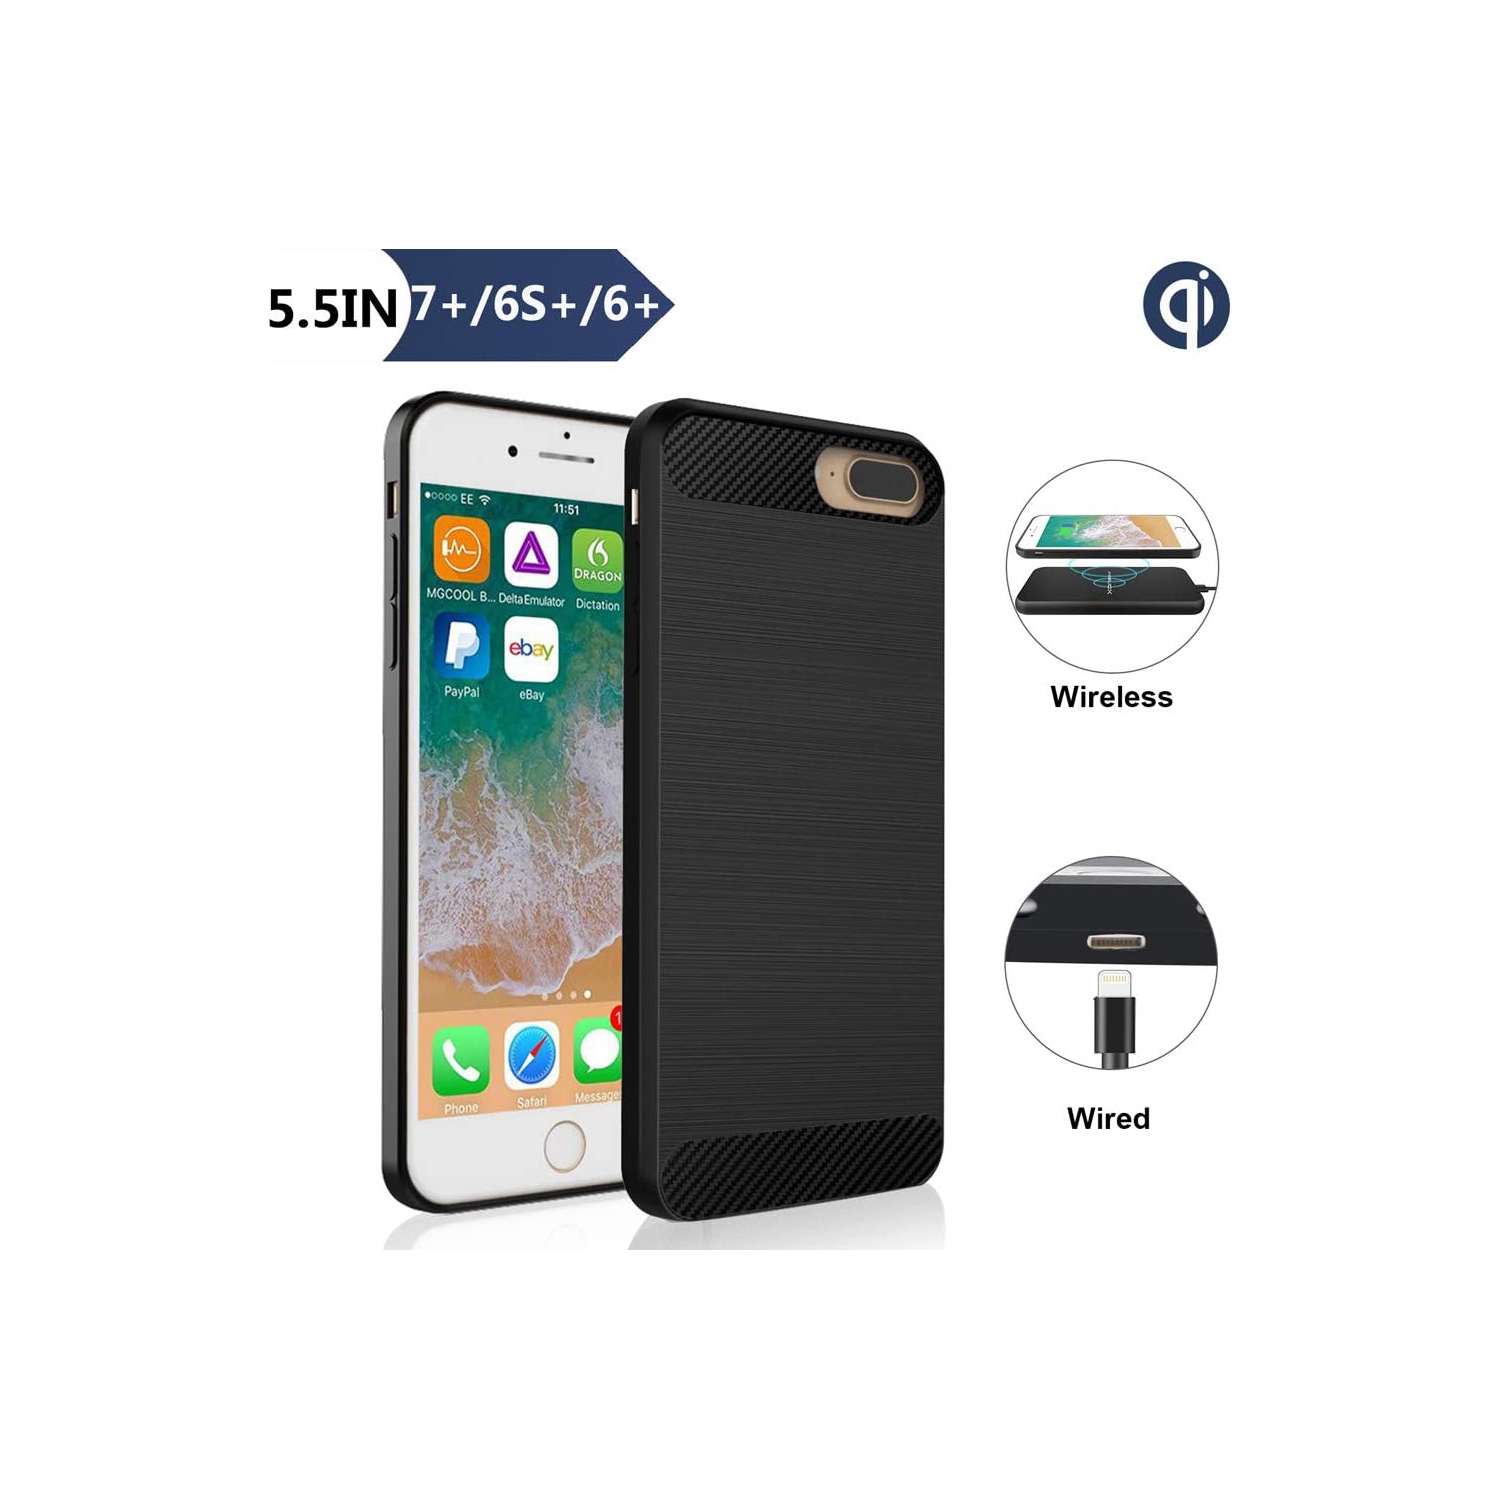 Qi Wireless Charging Case for iPhone 7 Plus/6S Plus/6 Plus(5.5” Screen Size-Plus), ANGELIOX Wireless Charging Enabling